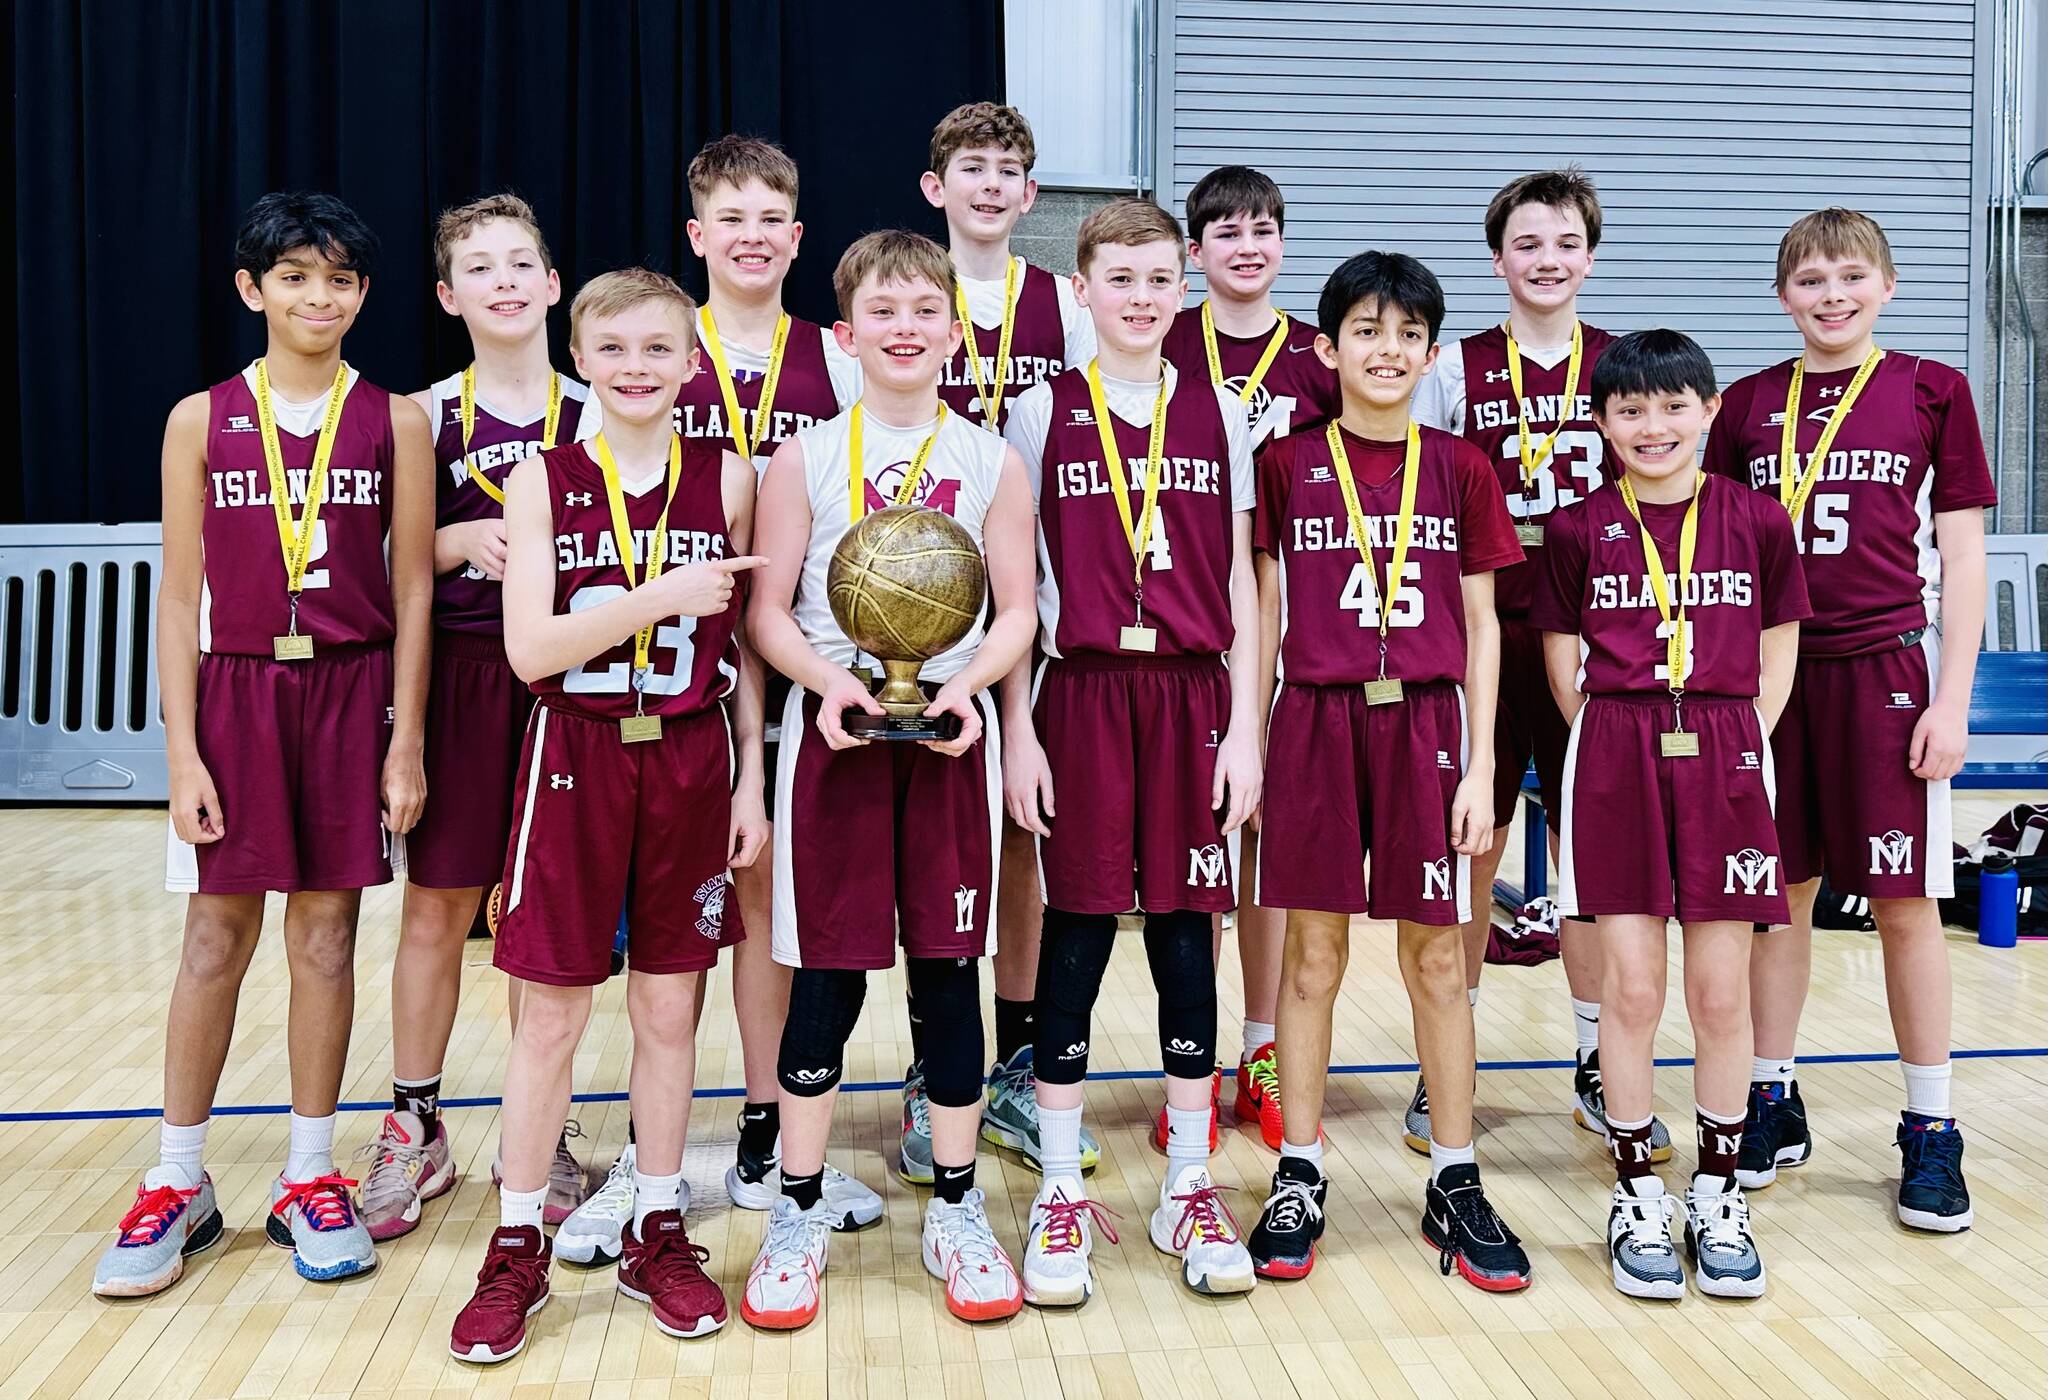 Mercer Island’s sixth-grade boys basketball squad won the gold division state championship at the Washington State Middle School Championships from March 15-17 in Spokane. The locals defeated Lake Washington, 39-34, in the final game. The boys also won the Eastside Travel League regular season and gold tournament championship. This is the second state title for this group, which also won in 2022 as fourth-graders. The Tony Locascio-coached team is: Cash Coochise, Paxton Conklin, Colton Gribble, Drew Munson, Will Russell, Cal Robinson, Blake Schwabe, Franco Giler, Jacob Sharpe, Luke Thomas, Luke Wilbur and Vidhun Srivathsan. Courtesy photo